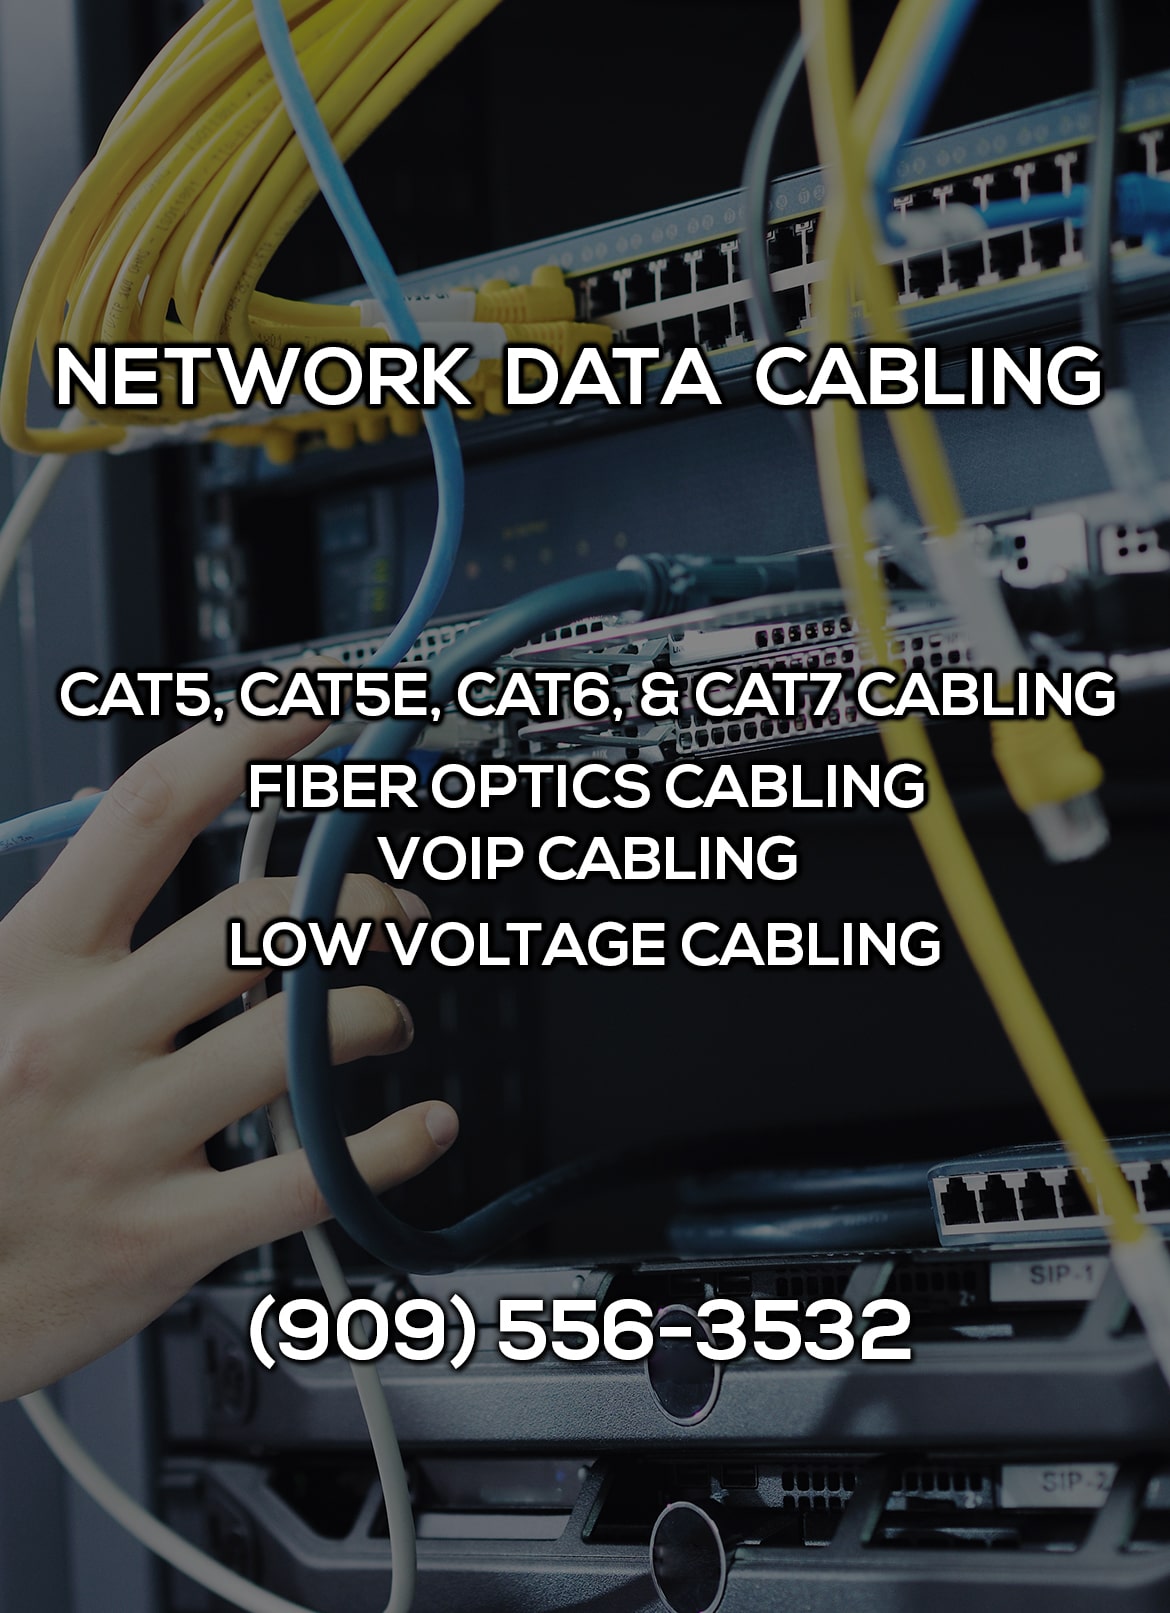 Network Data Cabling in Upland CA